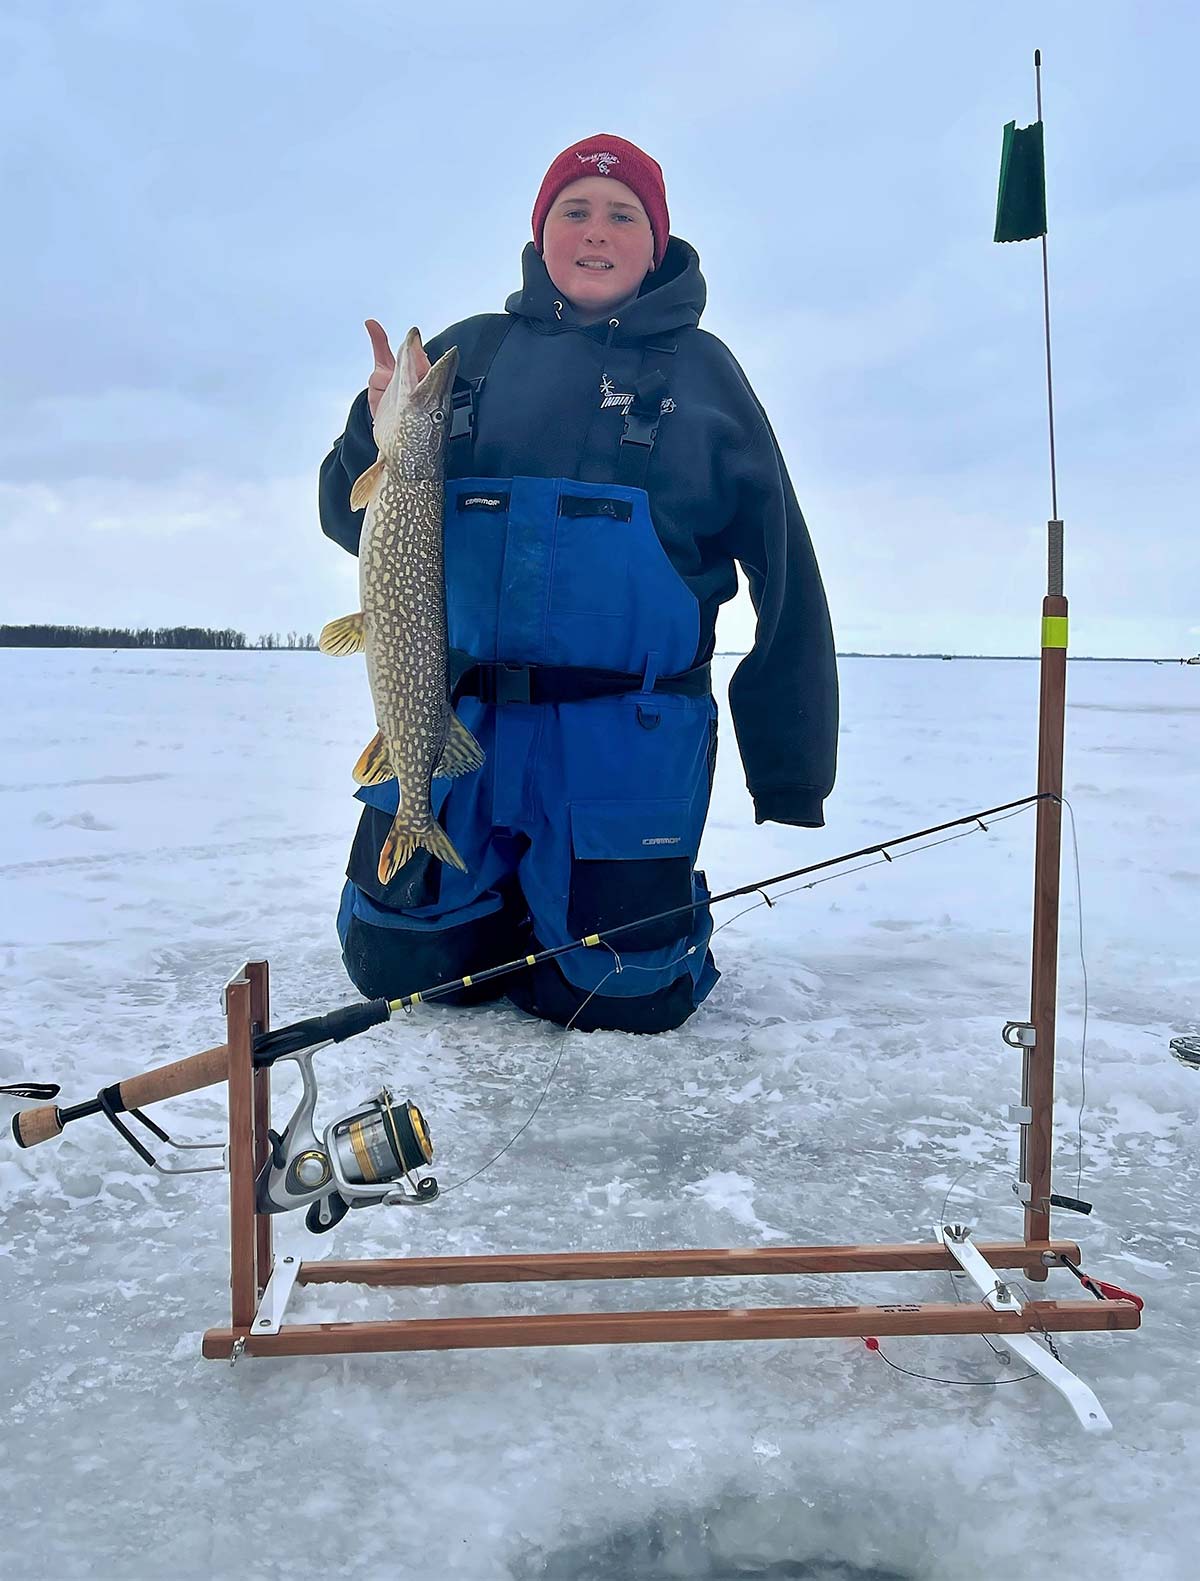 When Ice Fishing Tip Up Flags Go Up, You Run! 